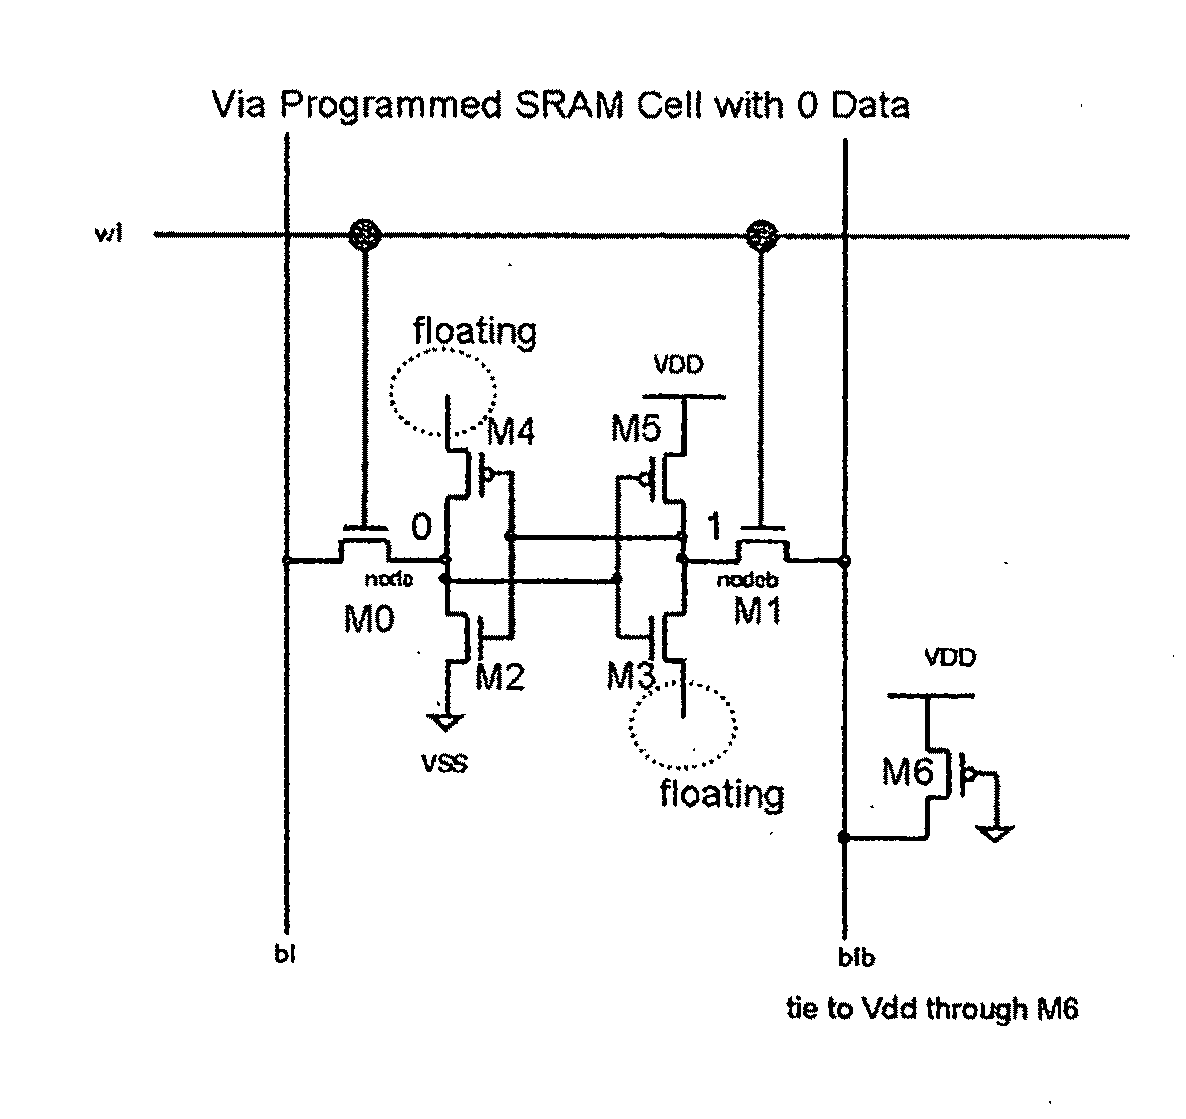 Converting SRAM cells to ROM Cells